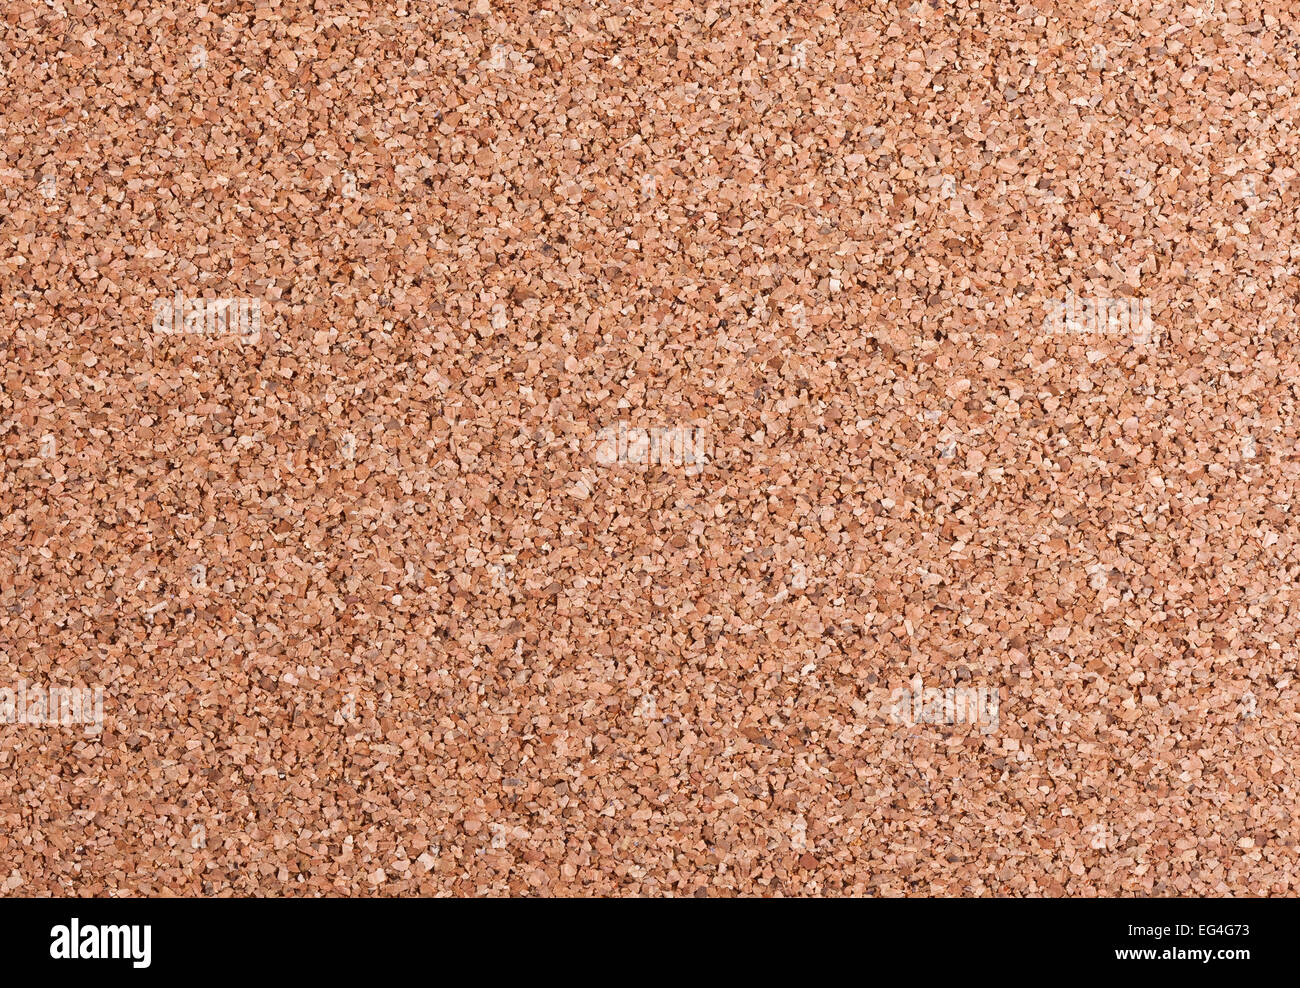 detail of natural cork background Stock Photo